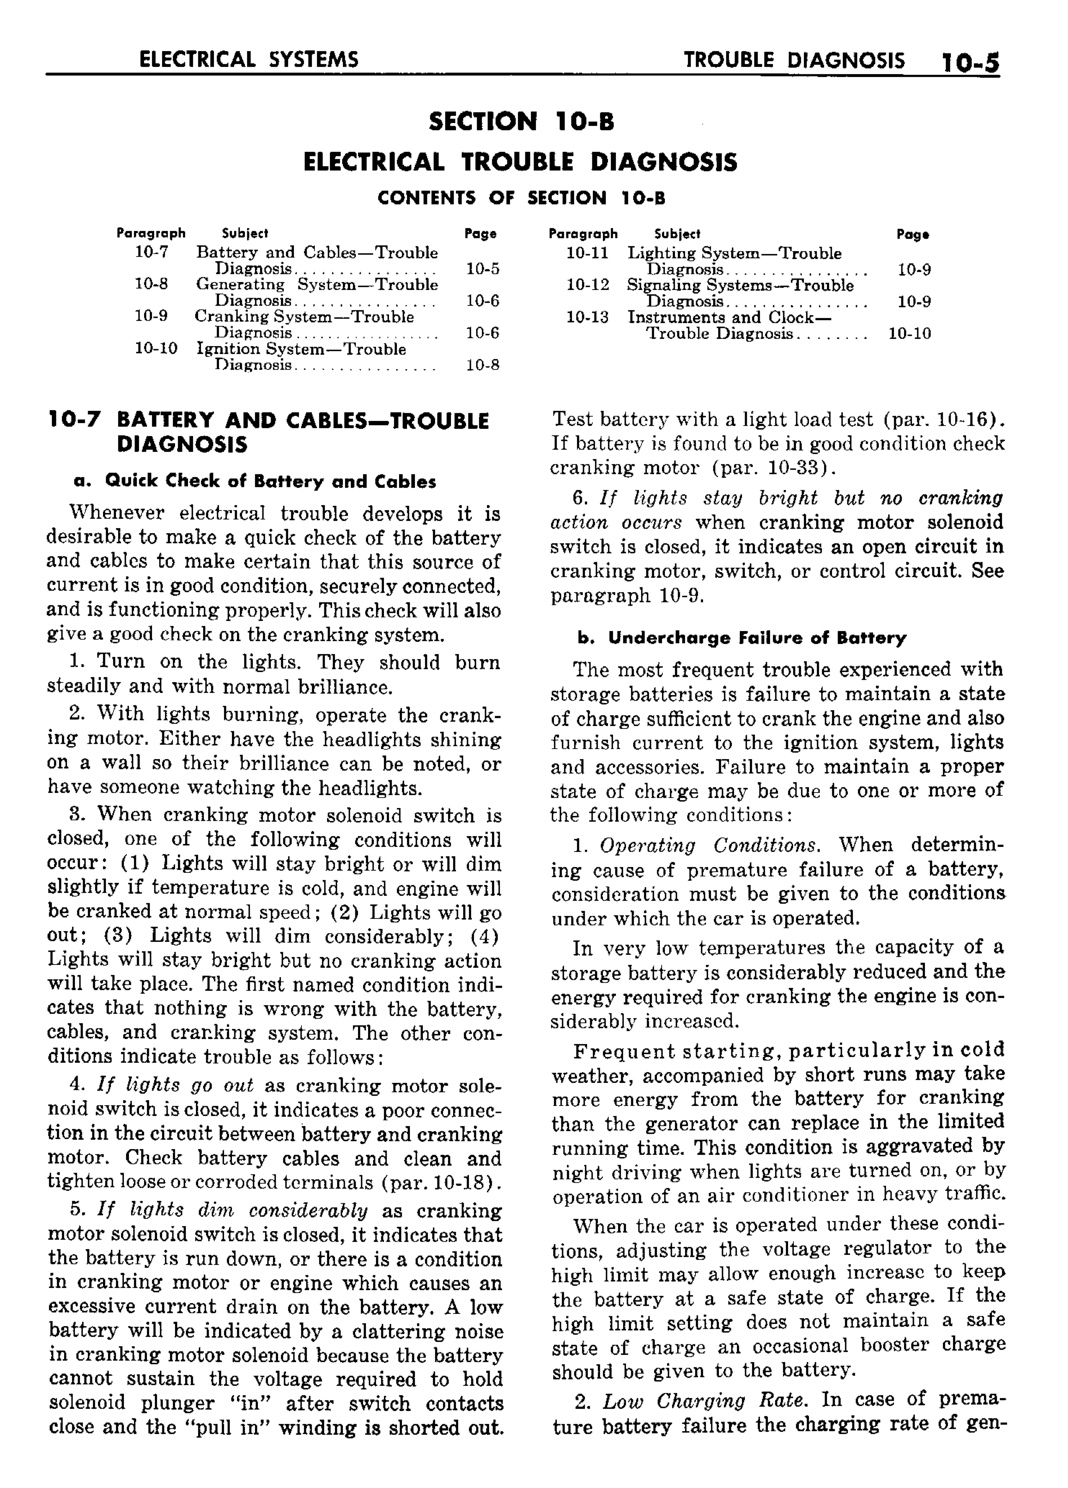 n_11 1960 Buick Shop Manual - Electrical Systems-005-005.jpg